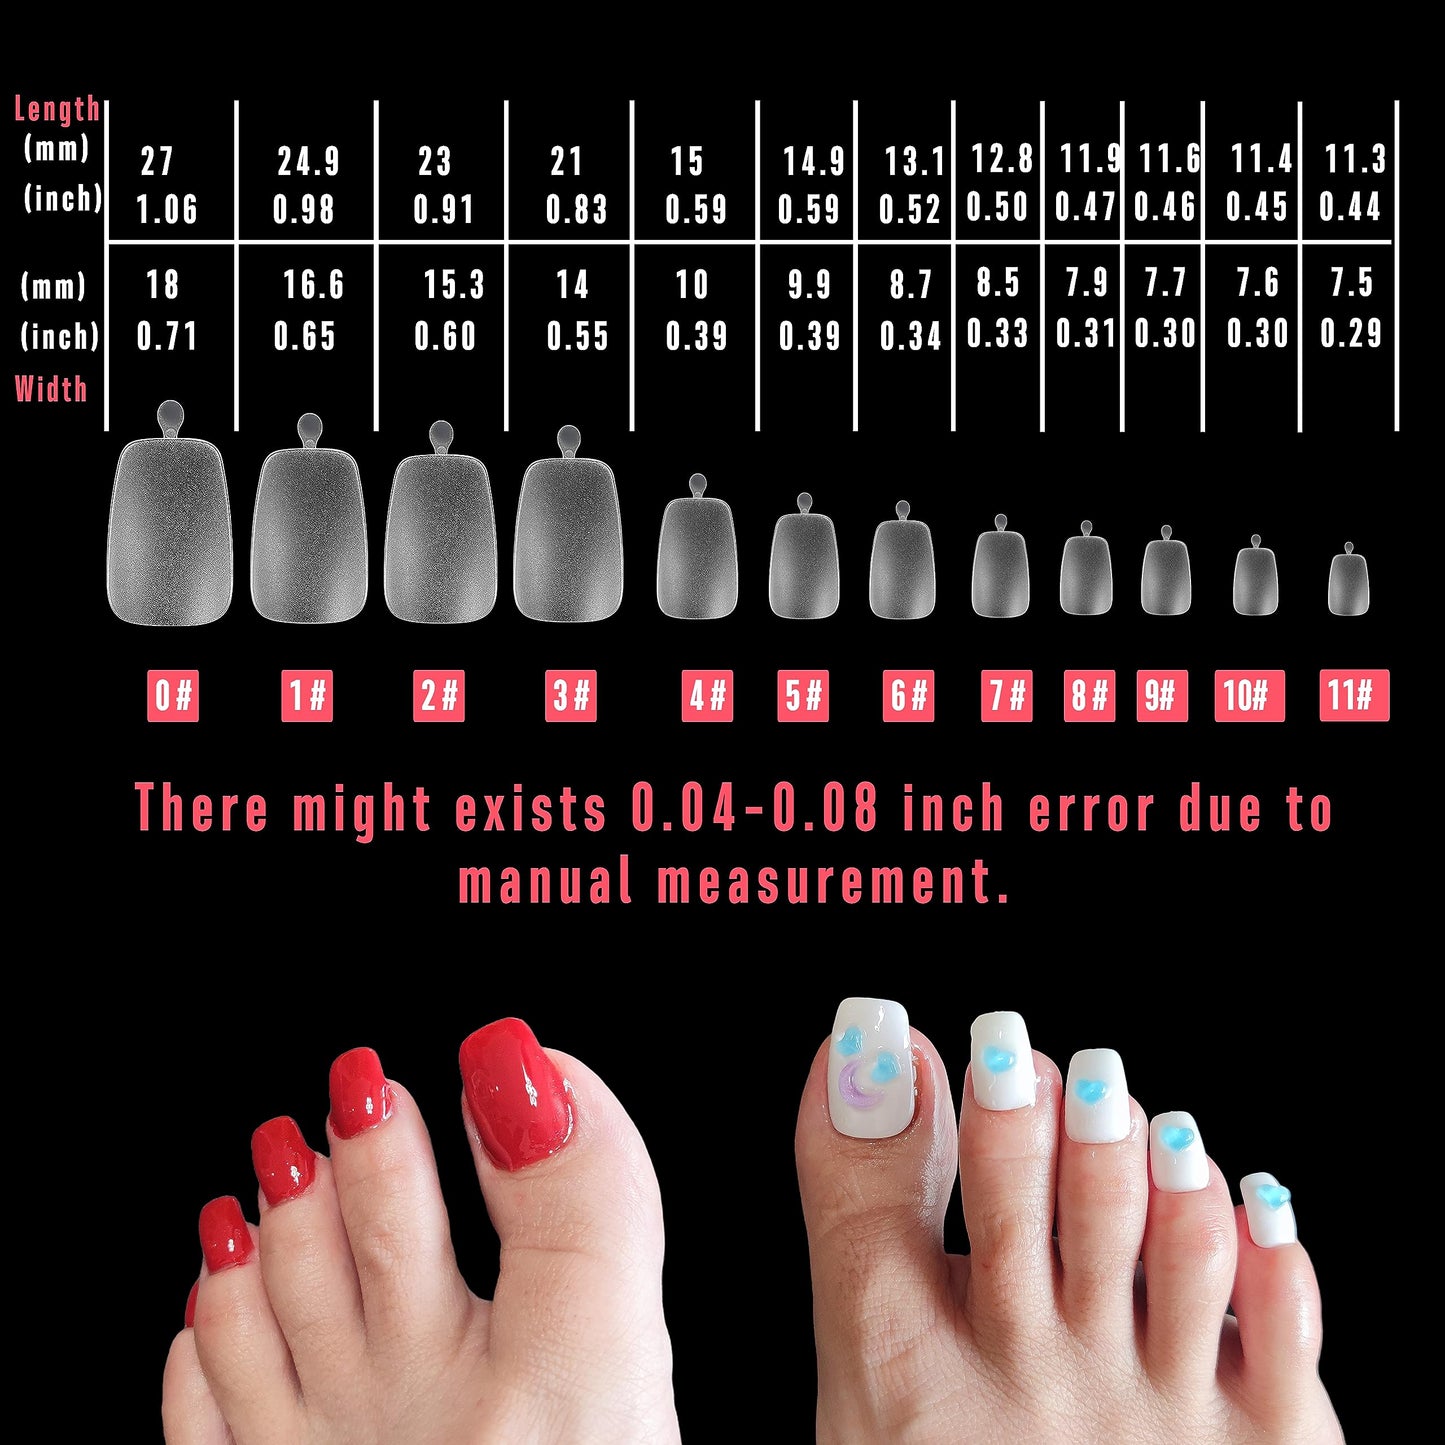 NOVO OVO 120 pcs Long Toe Nail Tips Press on, Curved Full Cover Longtoes Claw, Clear Double Matte Pre-filed Nail Extension for Pedicure Acrylic, Tapered Square Soft Gel Toenails x 12 Sizes